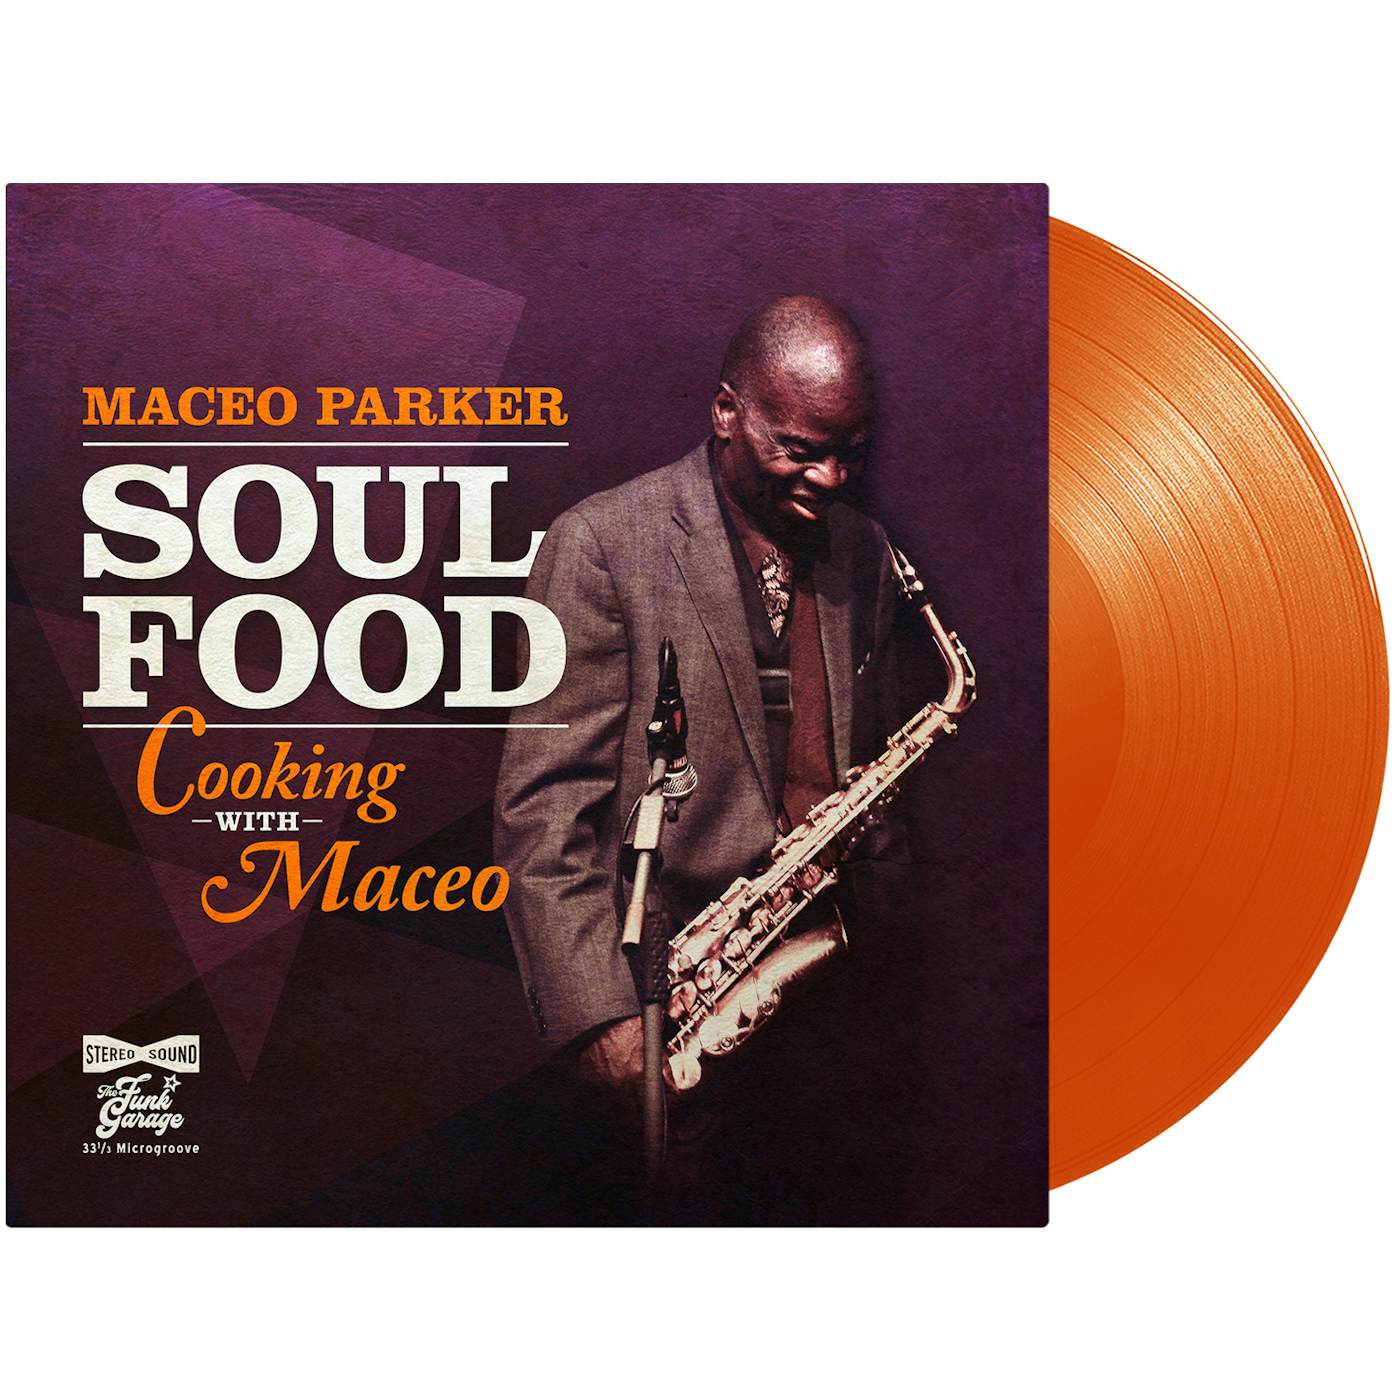 Maceo Parker SOUL FOOD - COOKING WITH MACEO Vinyl Record